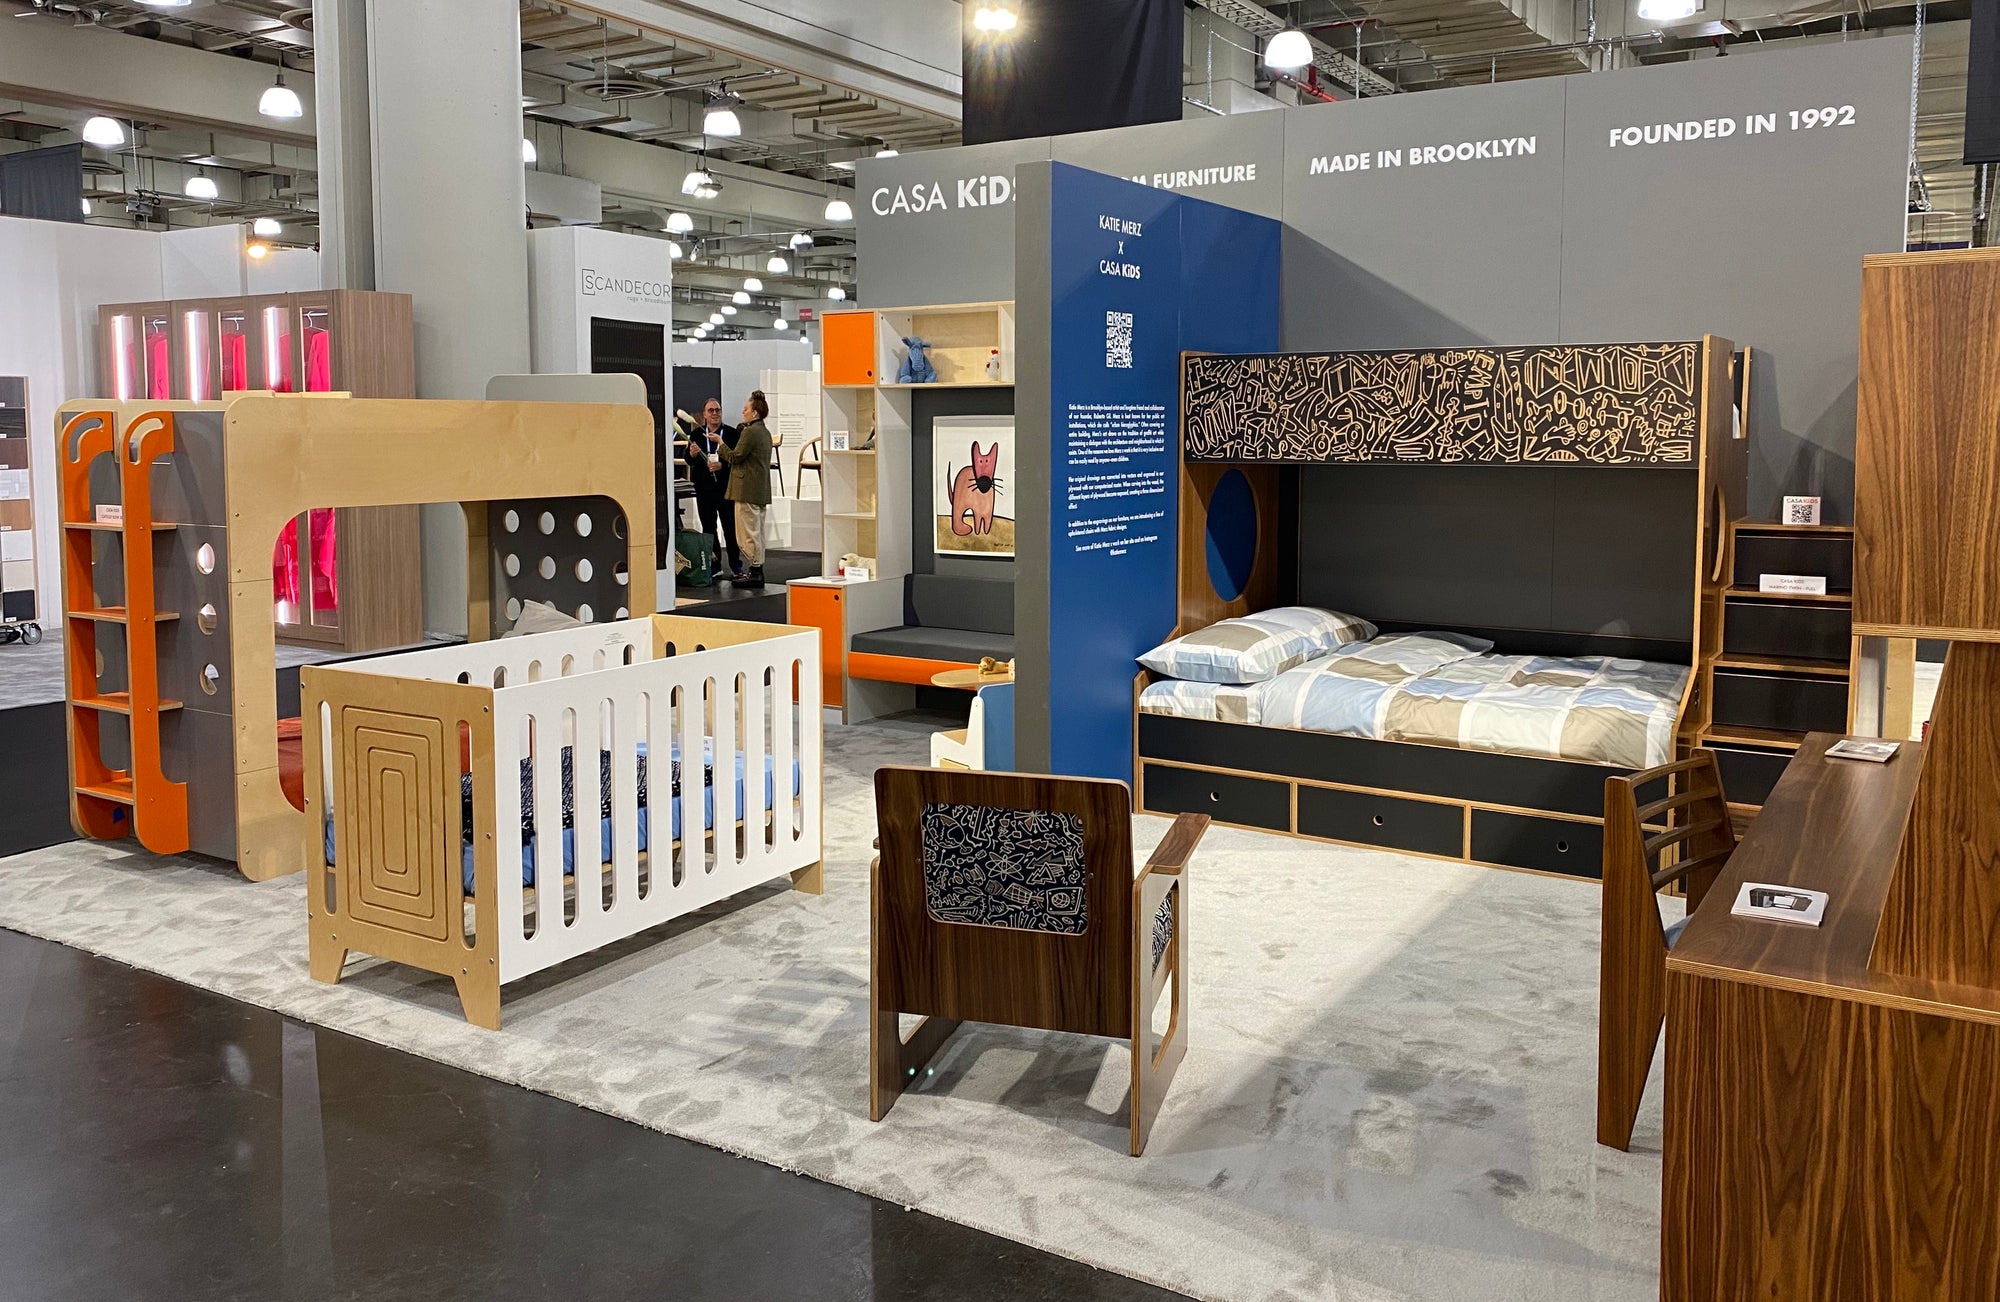 Furniture exhibition booth displaying a variety of modern children's beds and storage solutions.